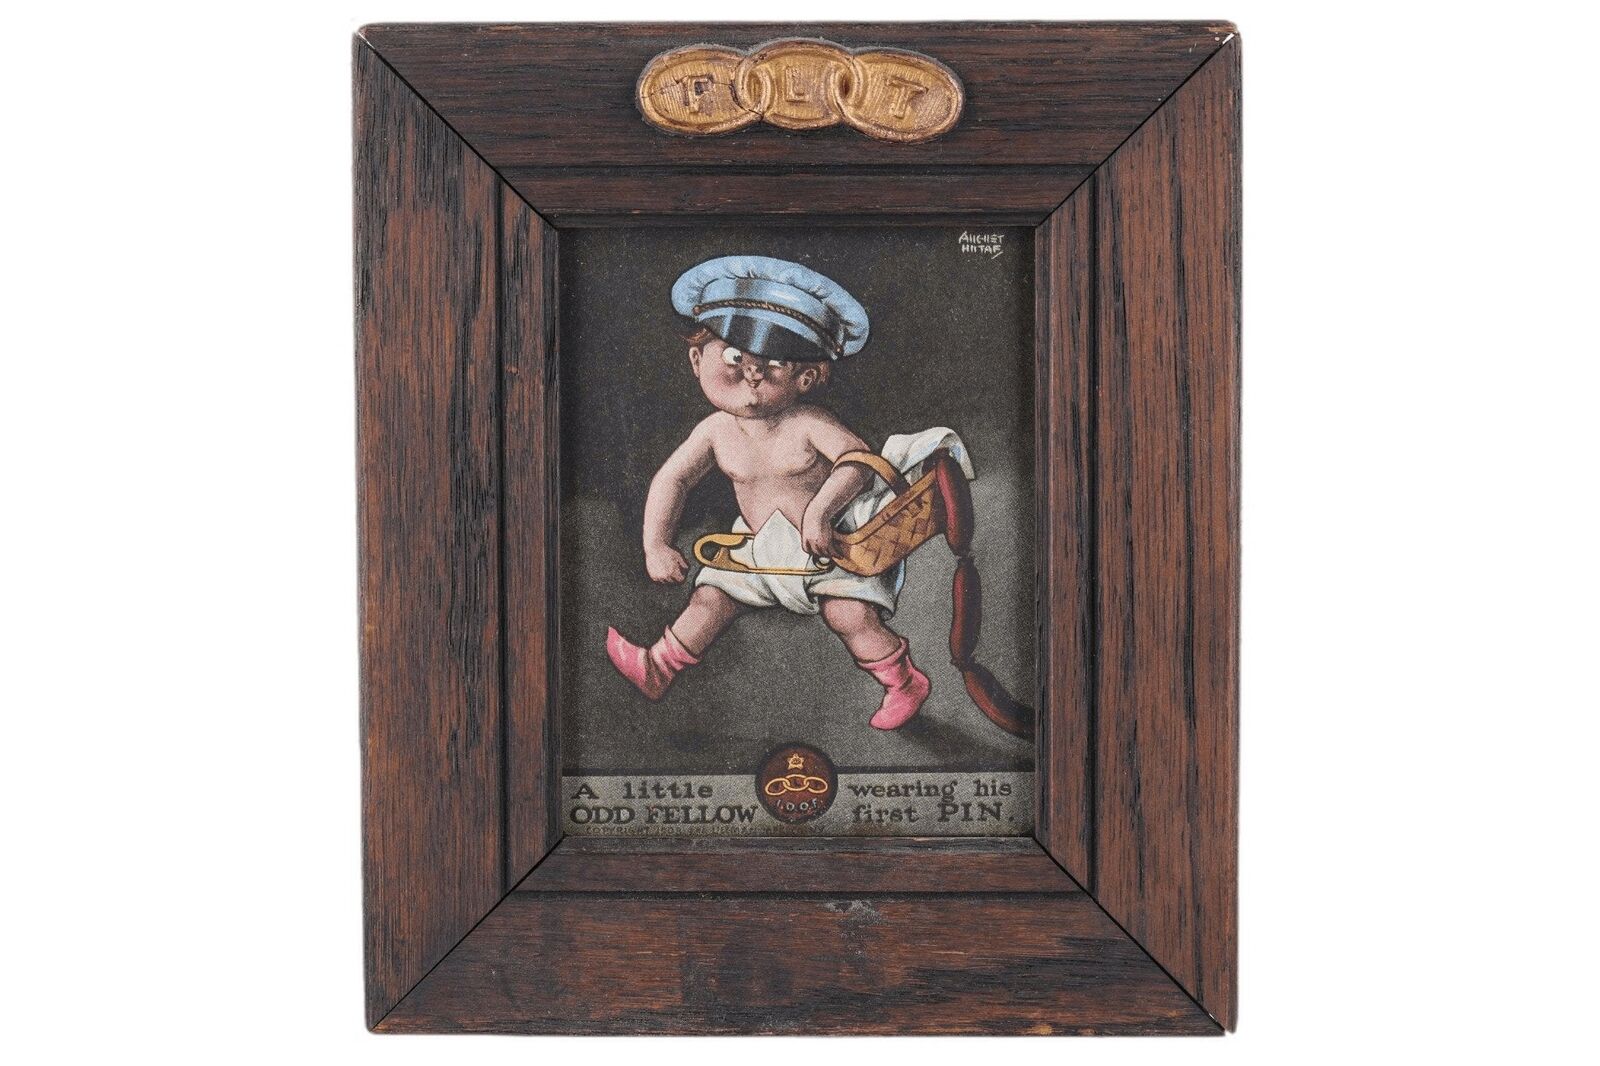 c1910 FLT A little Odd Fellow Wearing His First Pin Print with Oak Frame